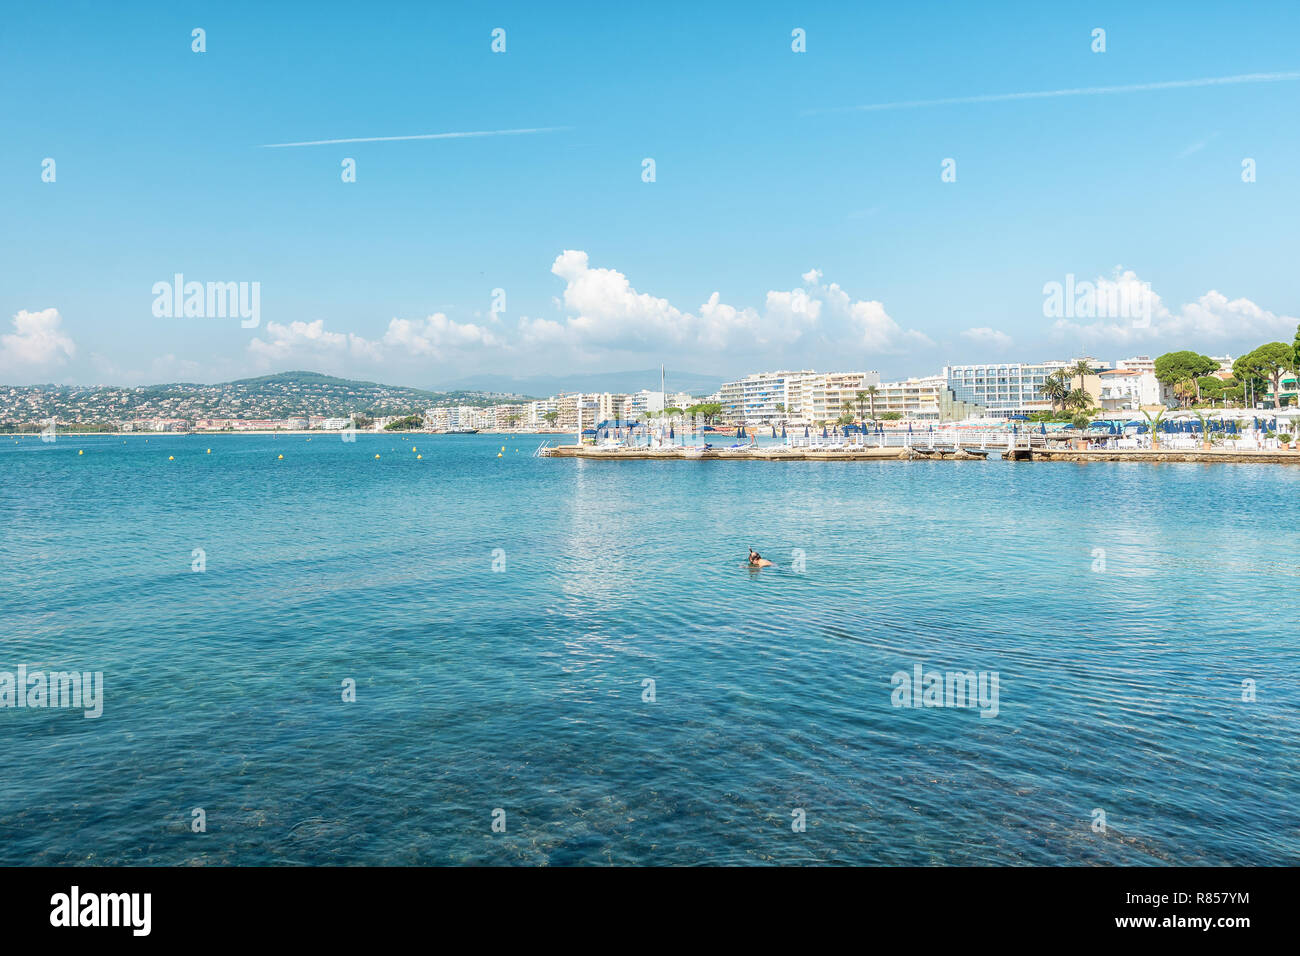 Juan-les-Pins, France, September 19, 2018: Snorkeler in the Golfe Juan with in the background the hotels of the French city of Juan-les-Pins Stock Photo